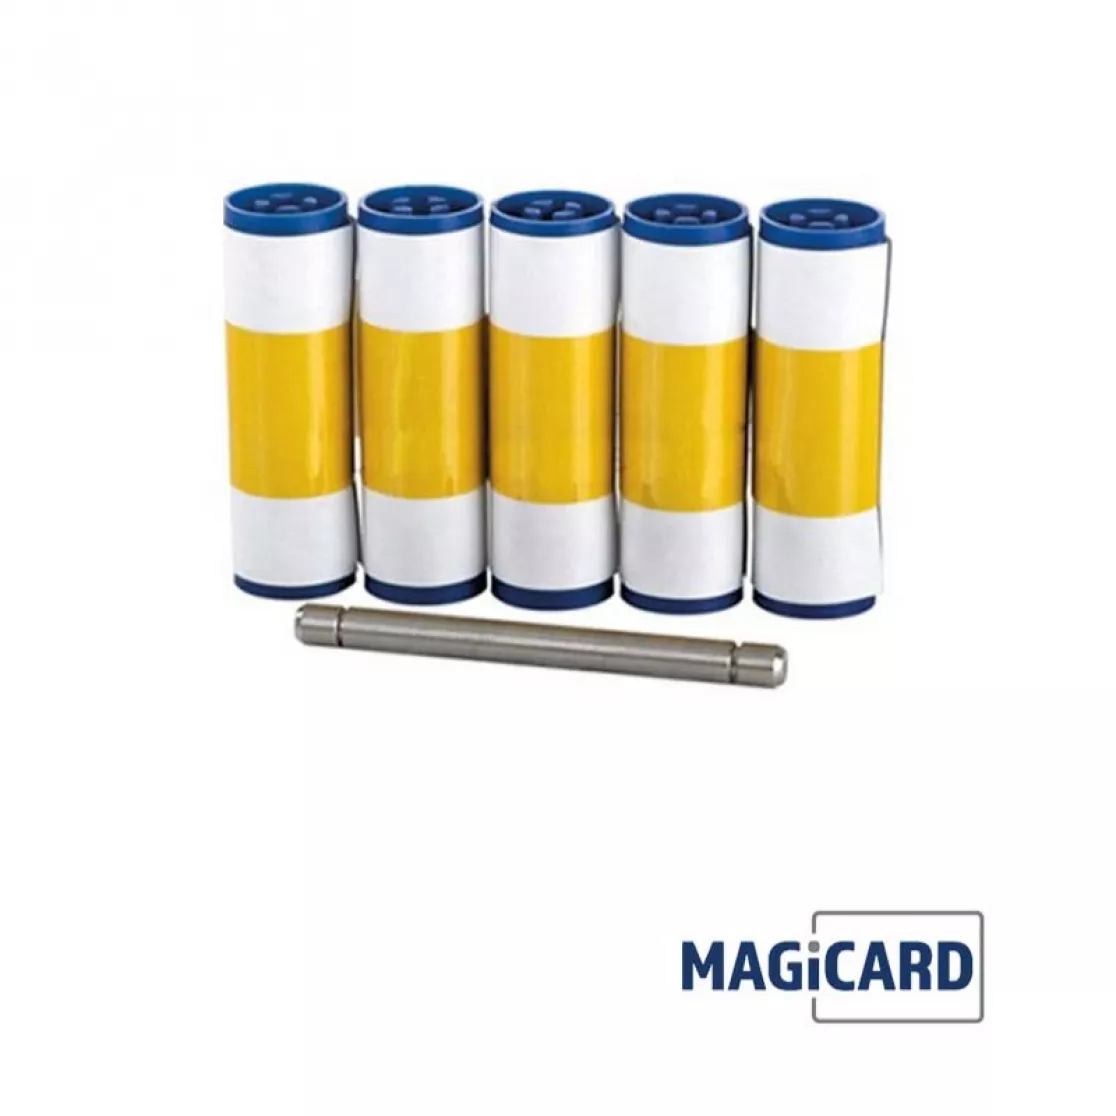 Cleaning rollers for card printer Magicard Pronto